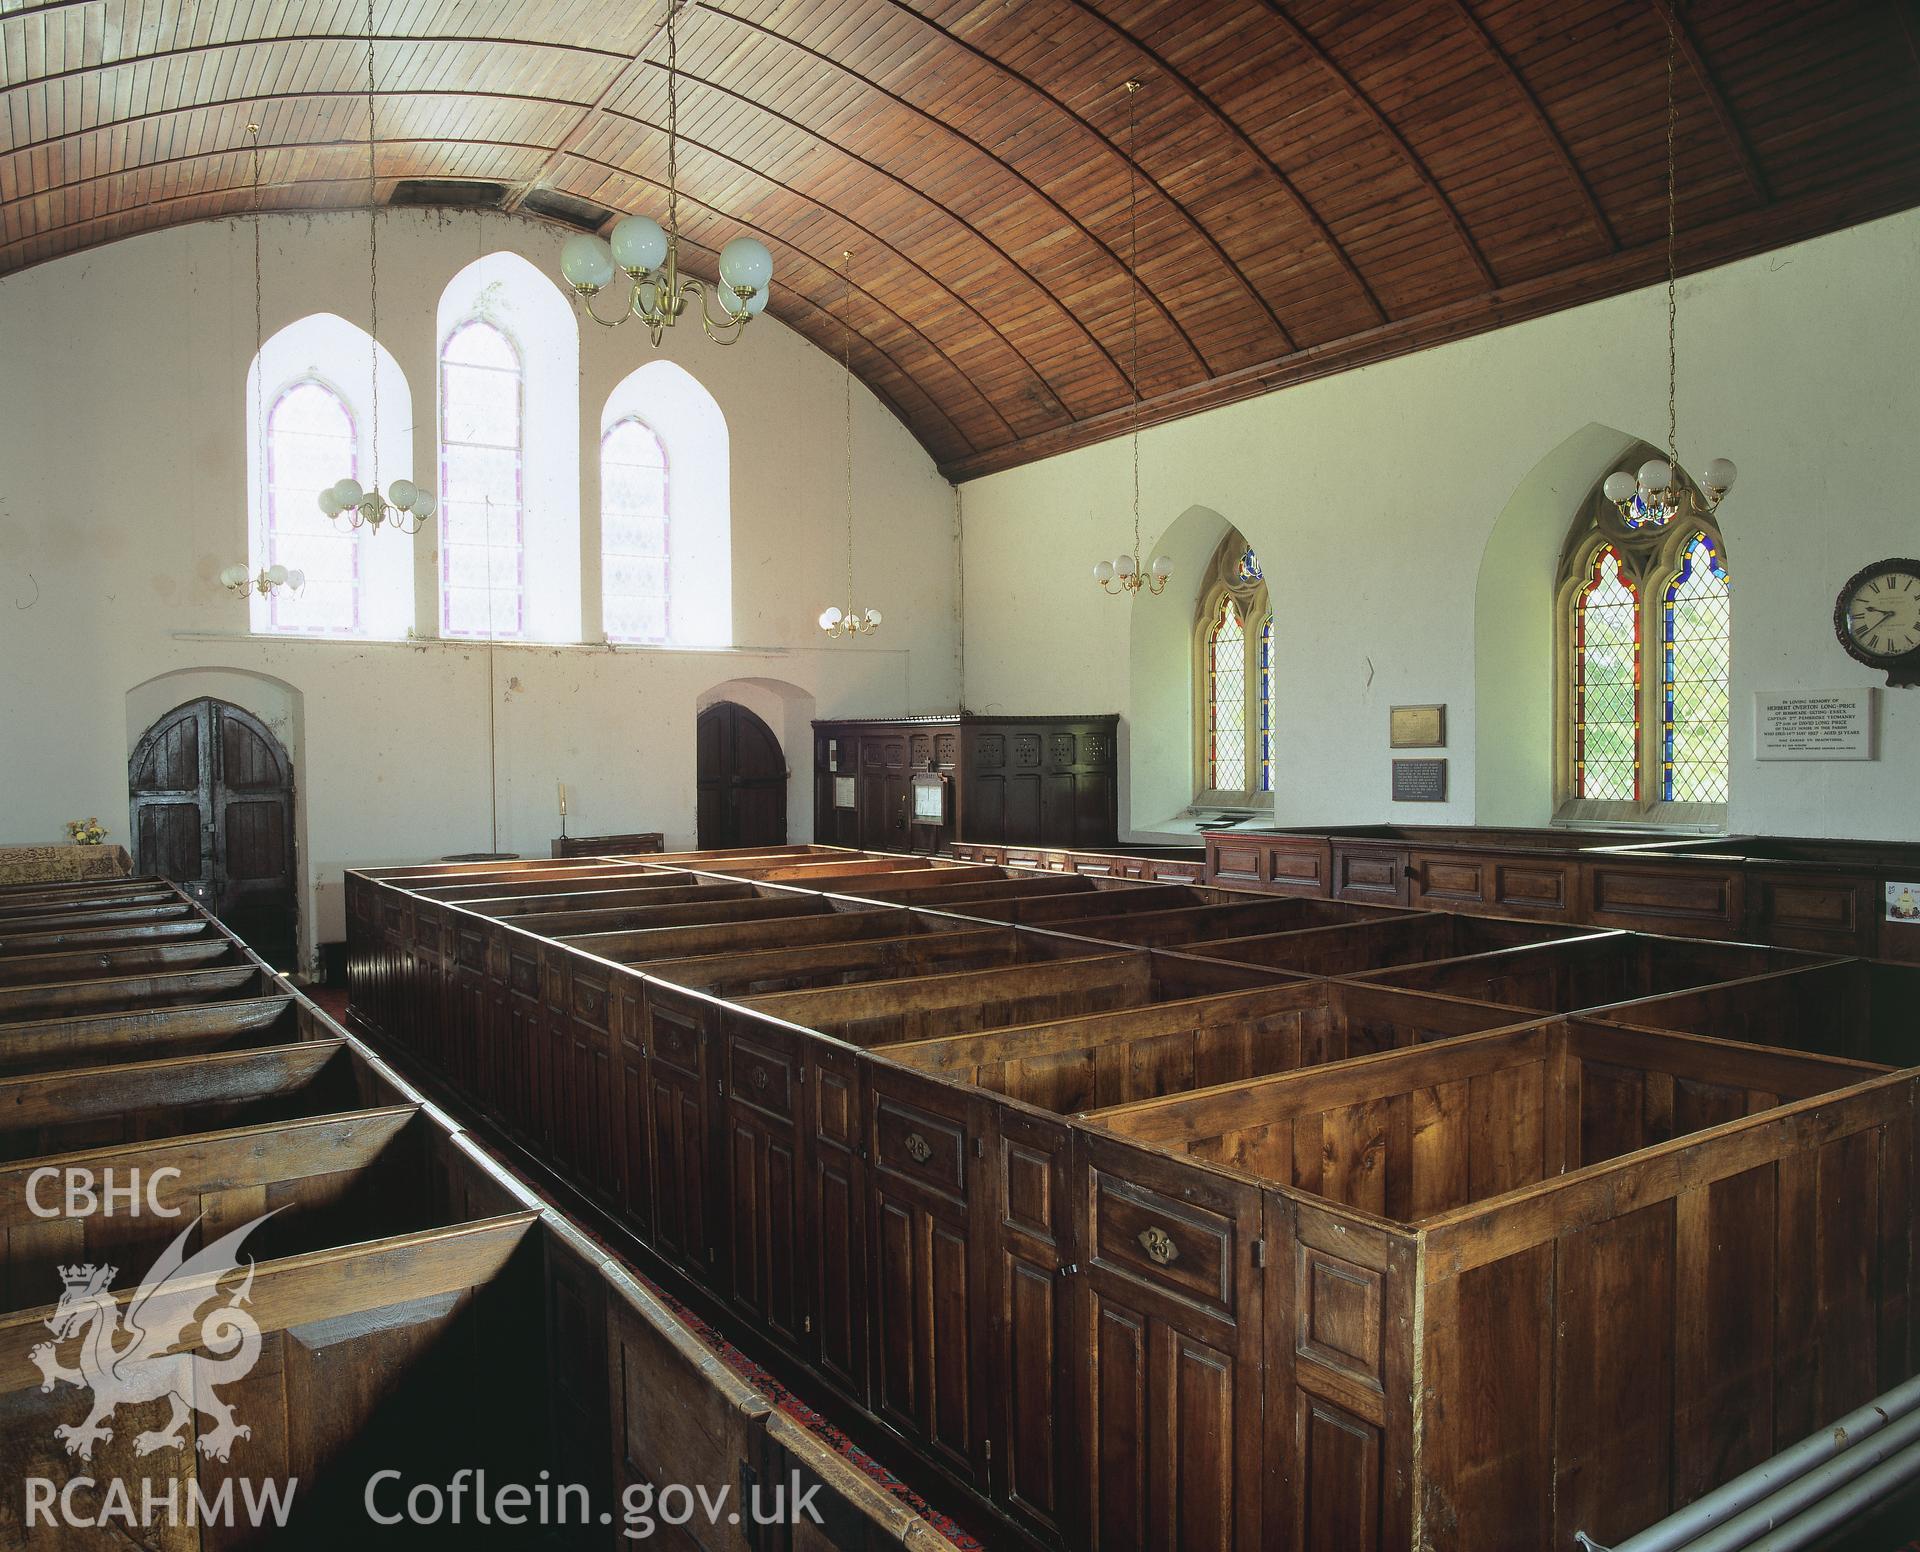 RCAHMW colour transparency showing interior view of St Michael's Church, Talley